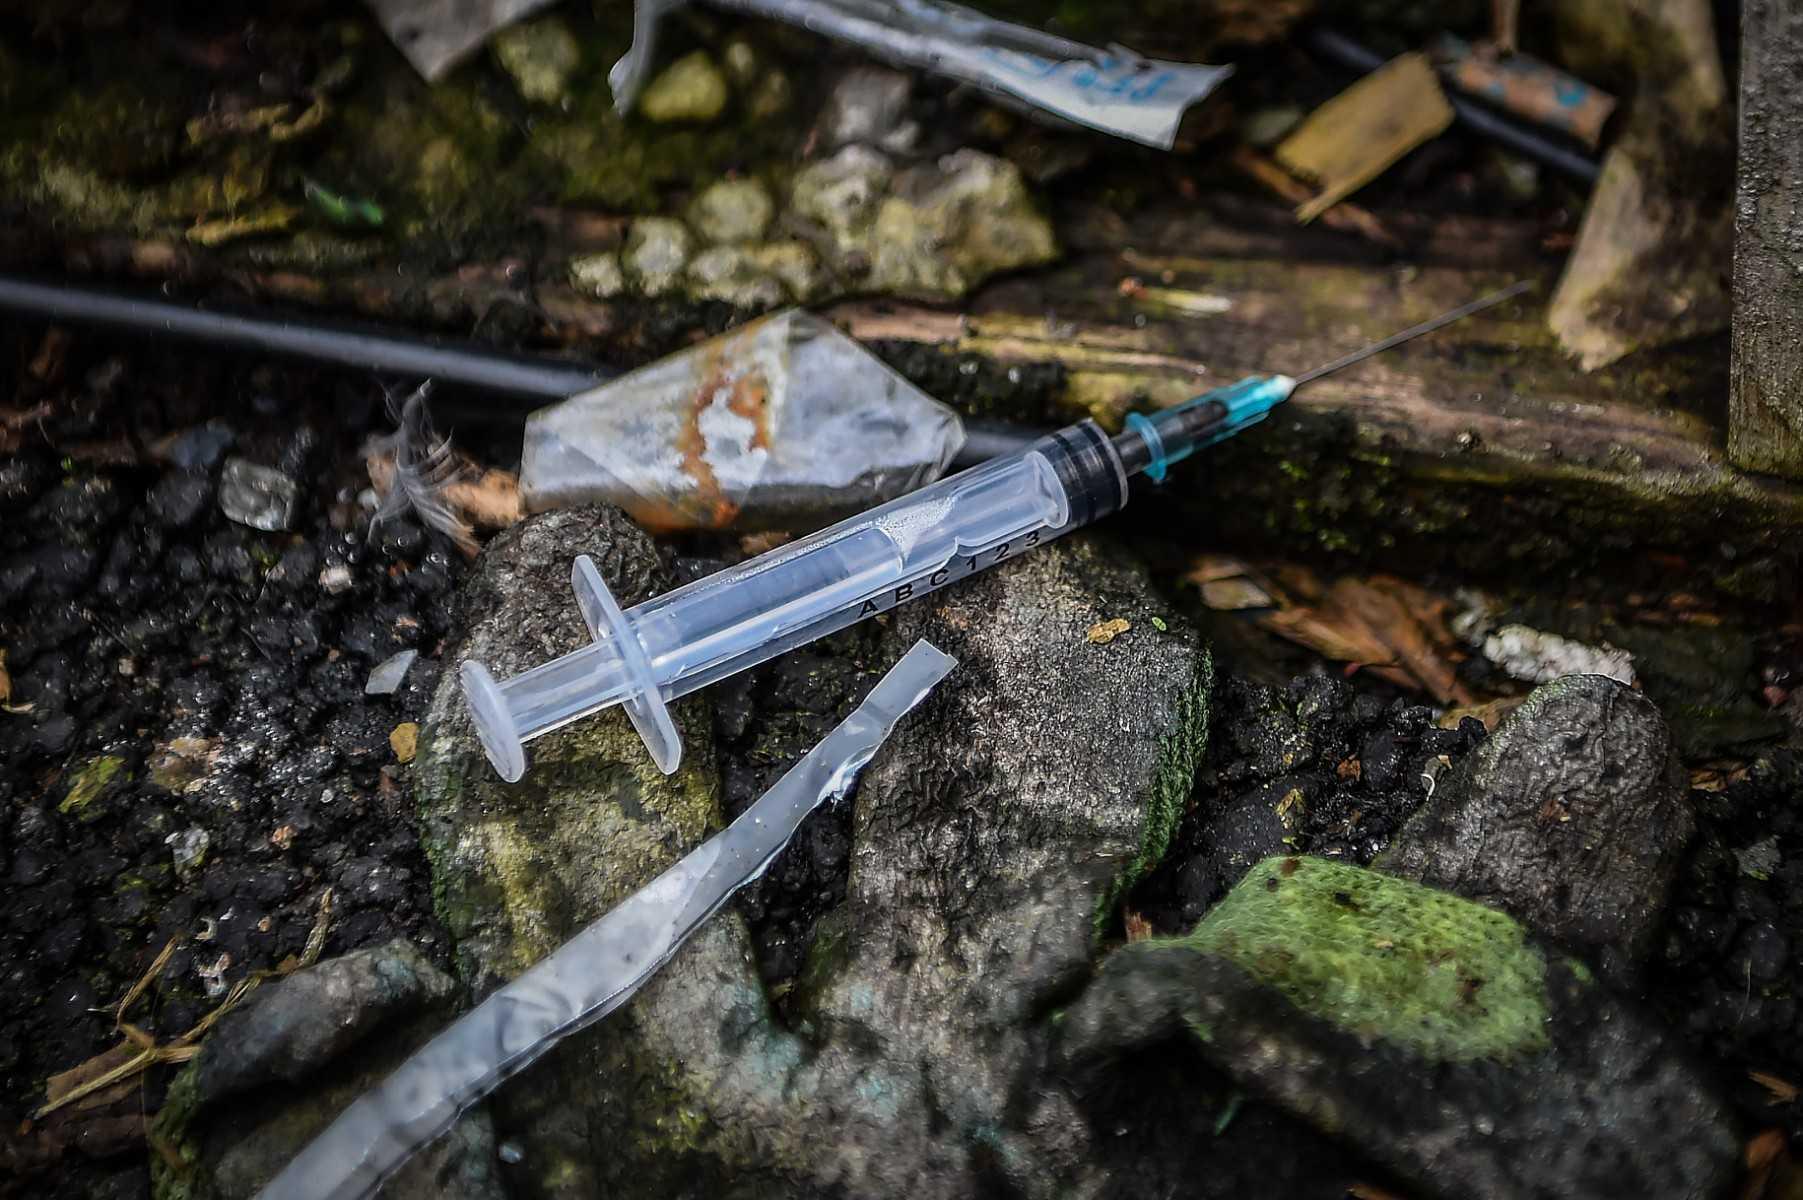 A picture shows discarded drug paraphenallia in a small wooded area used by addicts to take drugs near Glasgow city centre, Scotland, on Aug 15, 2019. Photo: AFP